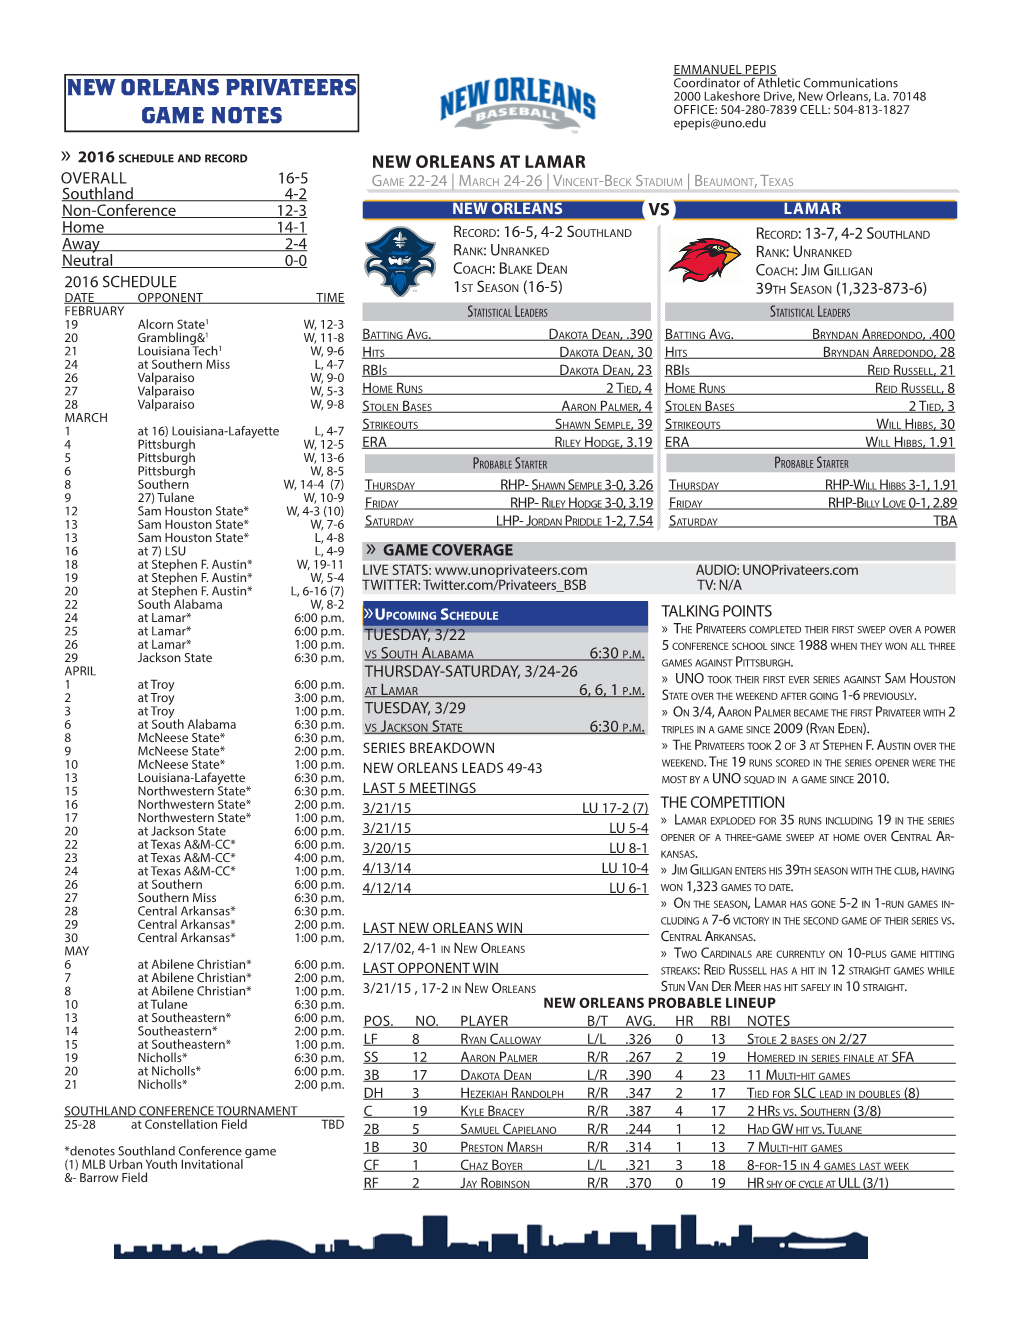 New Orleans Privateers Game Notes